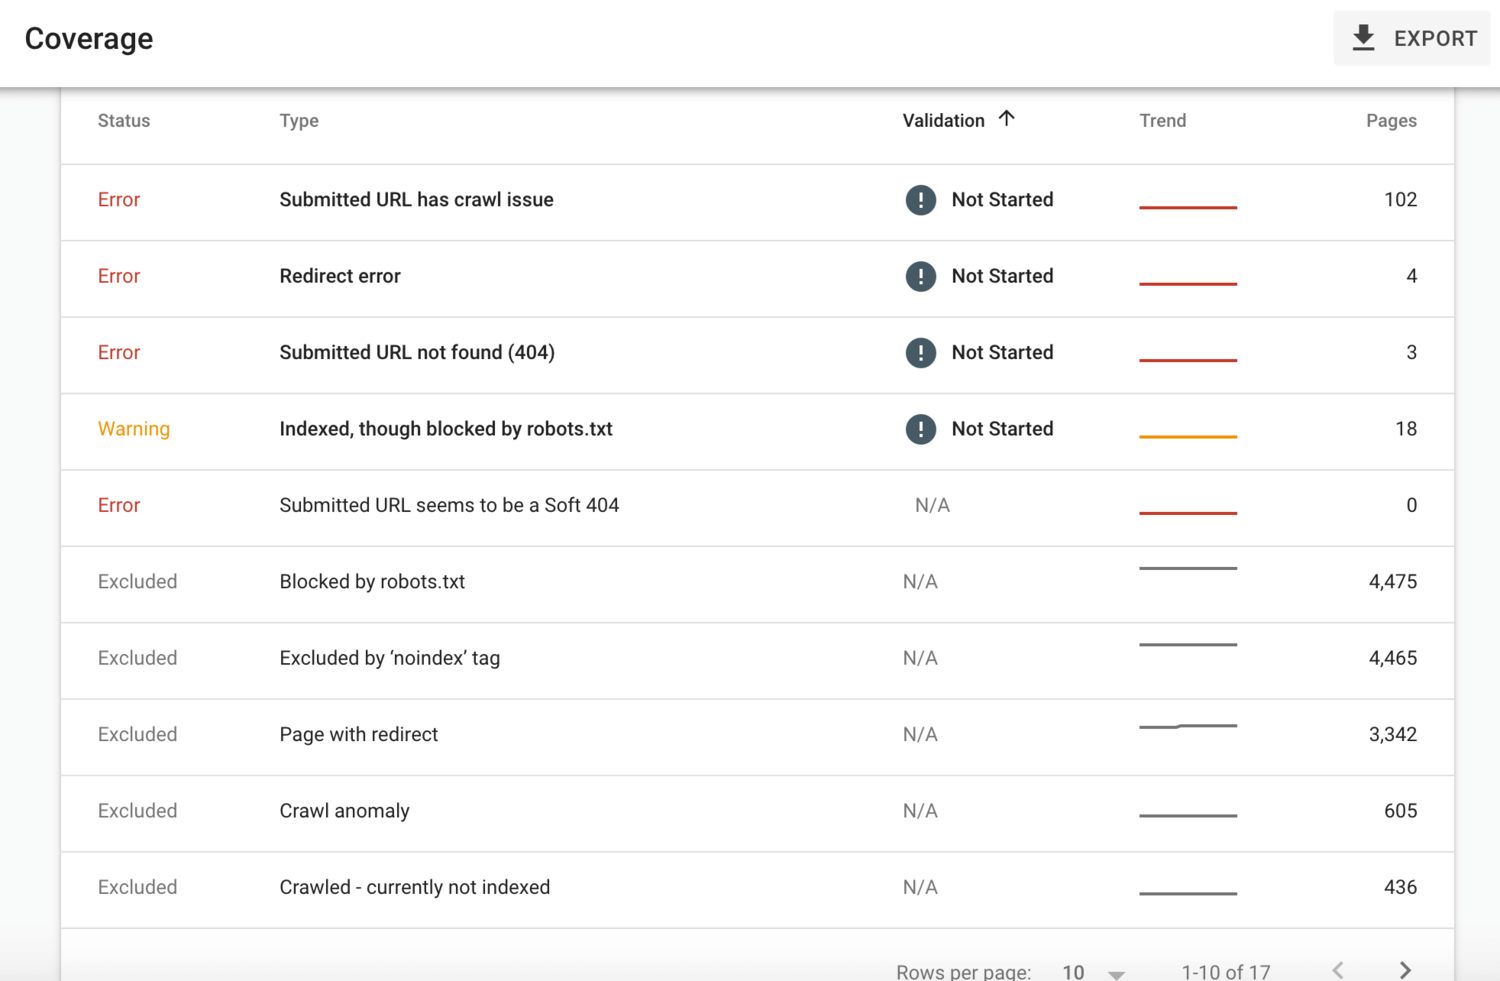 Screenshot of a Google Search Console coverage report showing a list of issues